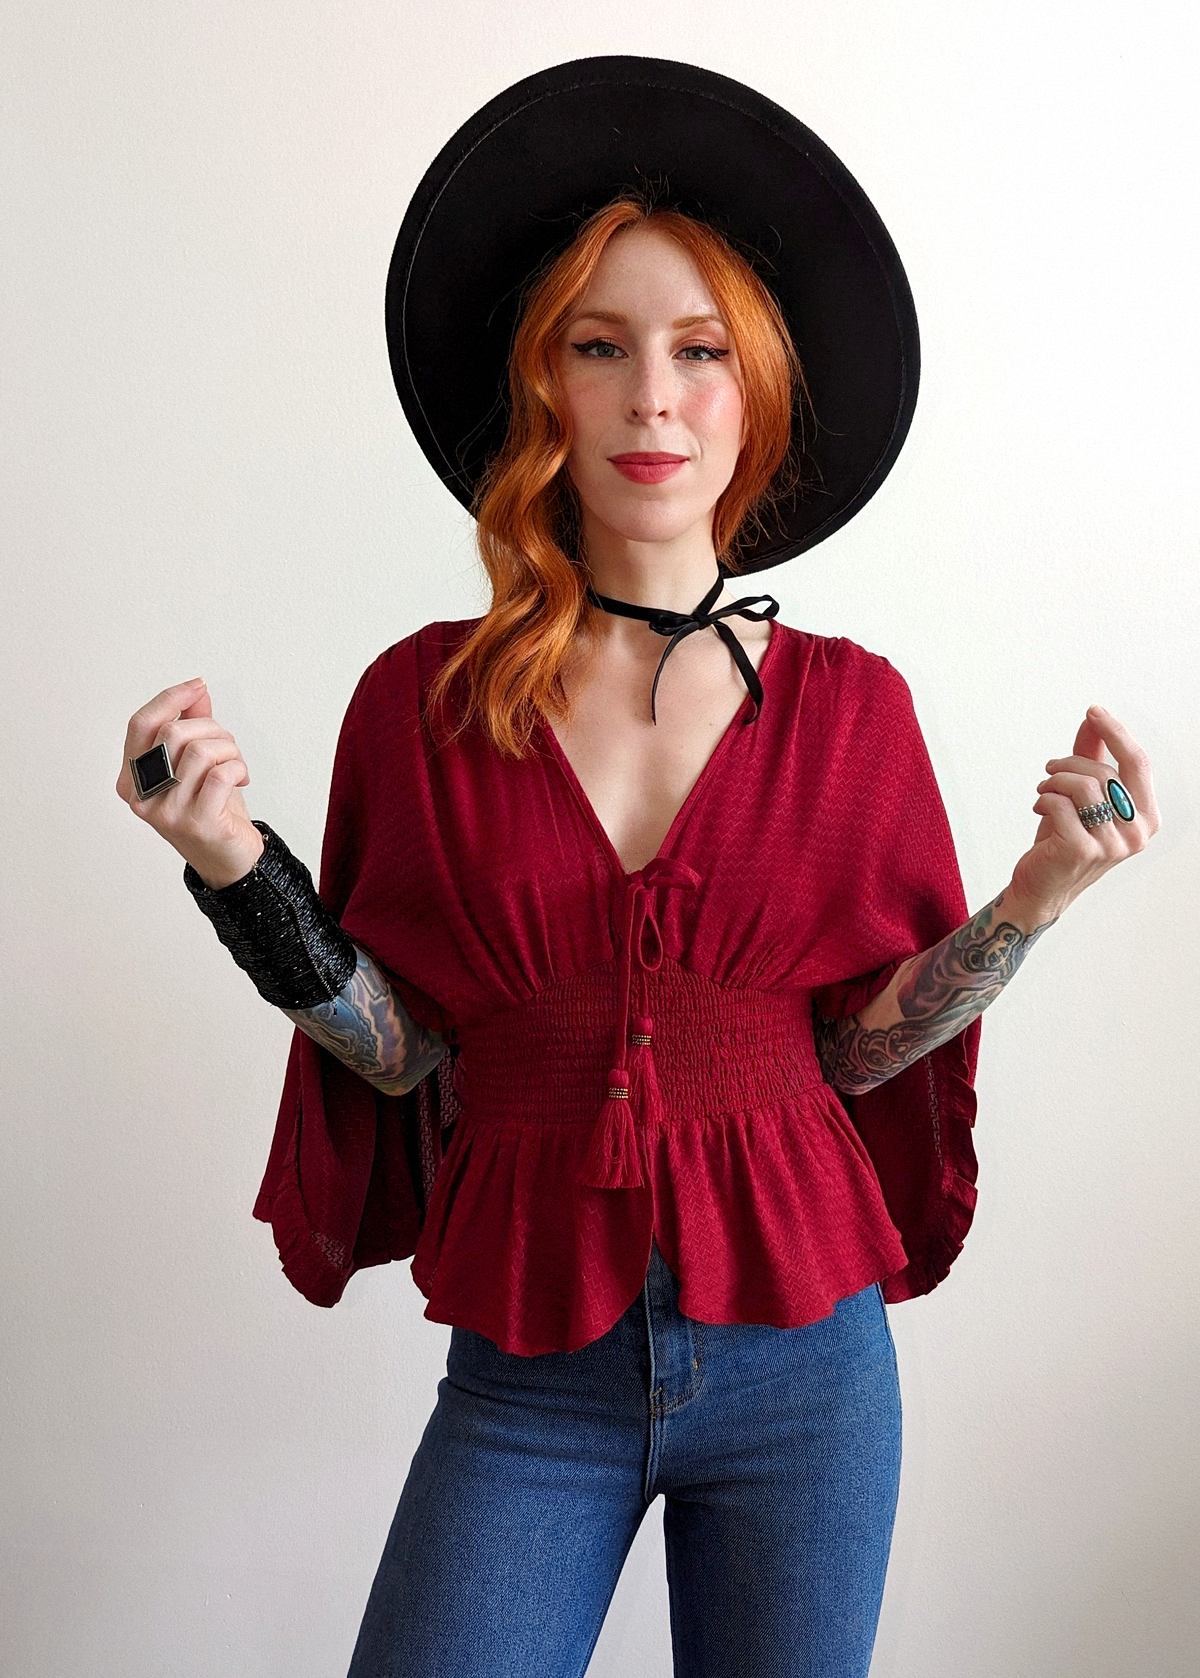 Stevie Nicks Vibes. Deep red top with batwing cape sleeves, smocked bodice, and tassel tie details at front